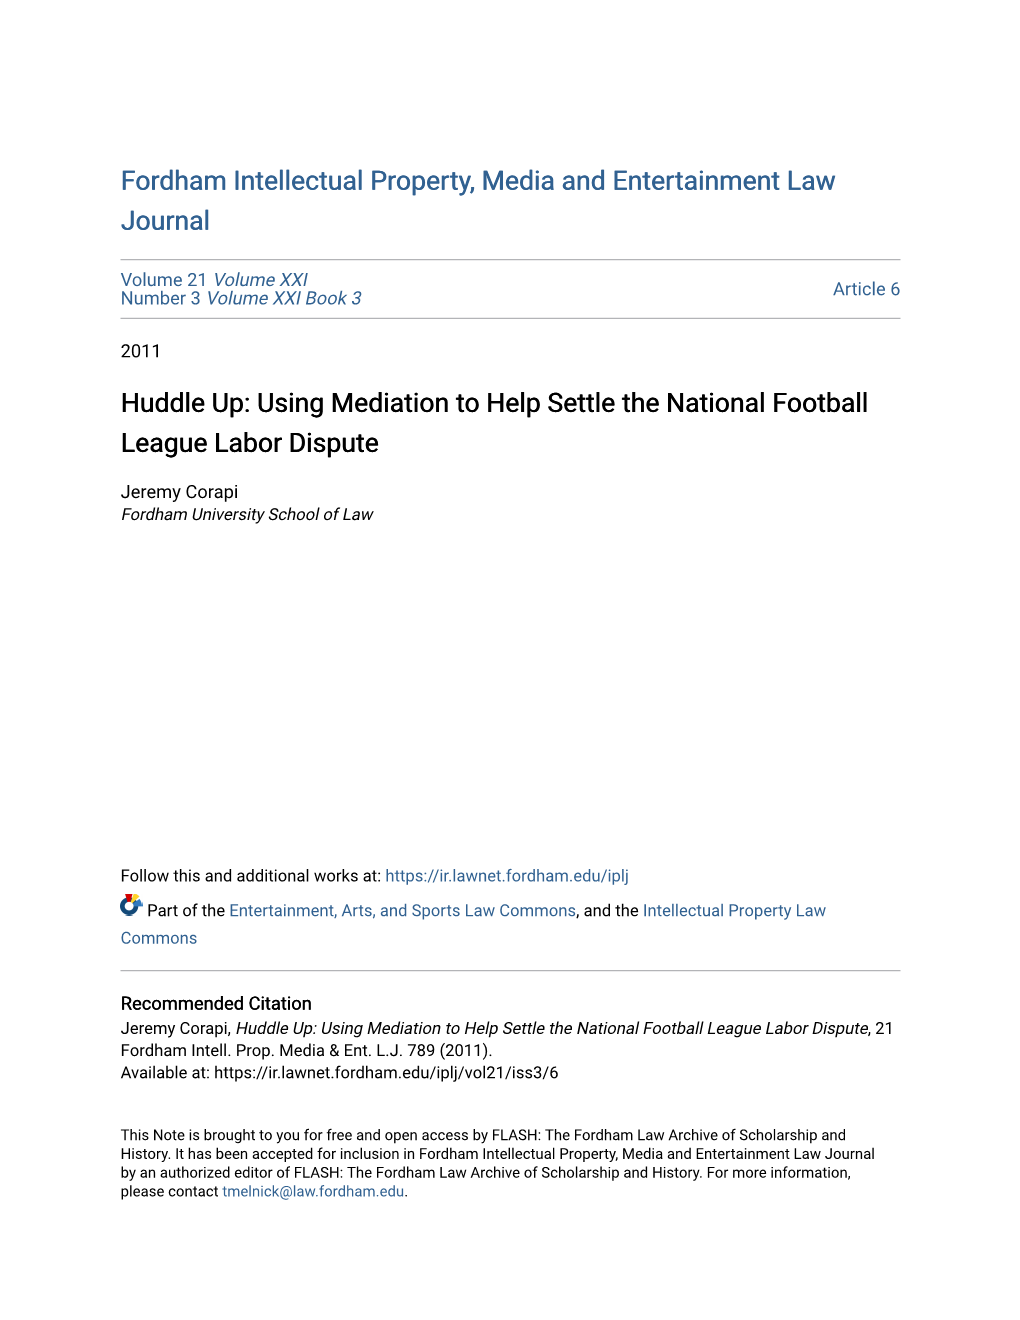 Using Mediation to Help Settle the National Football League Labor Dispute